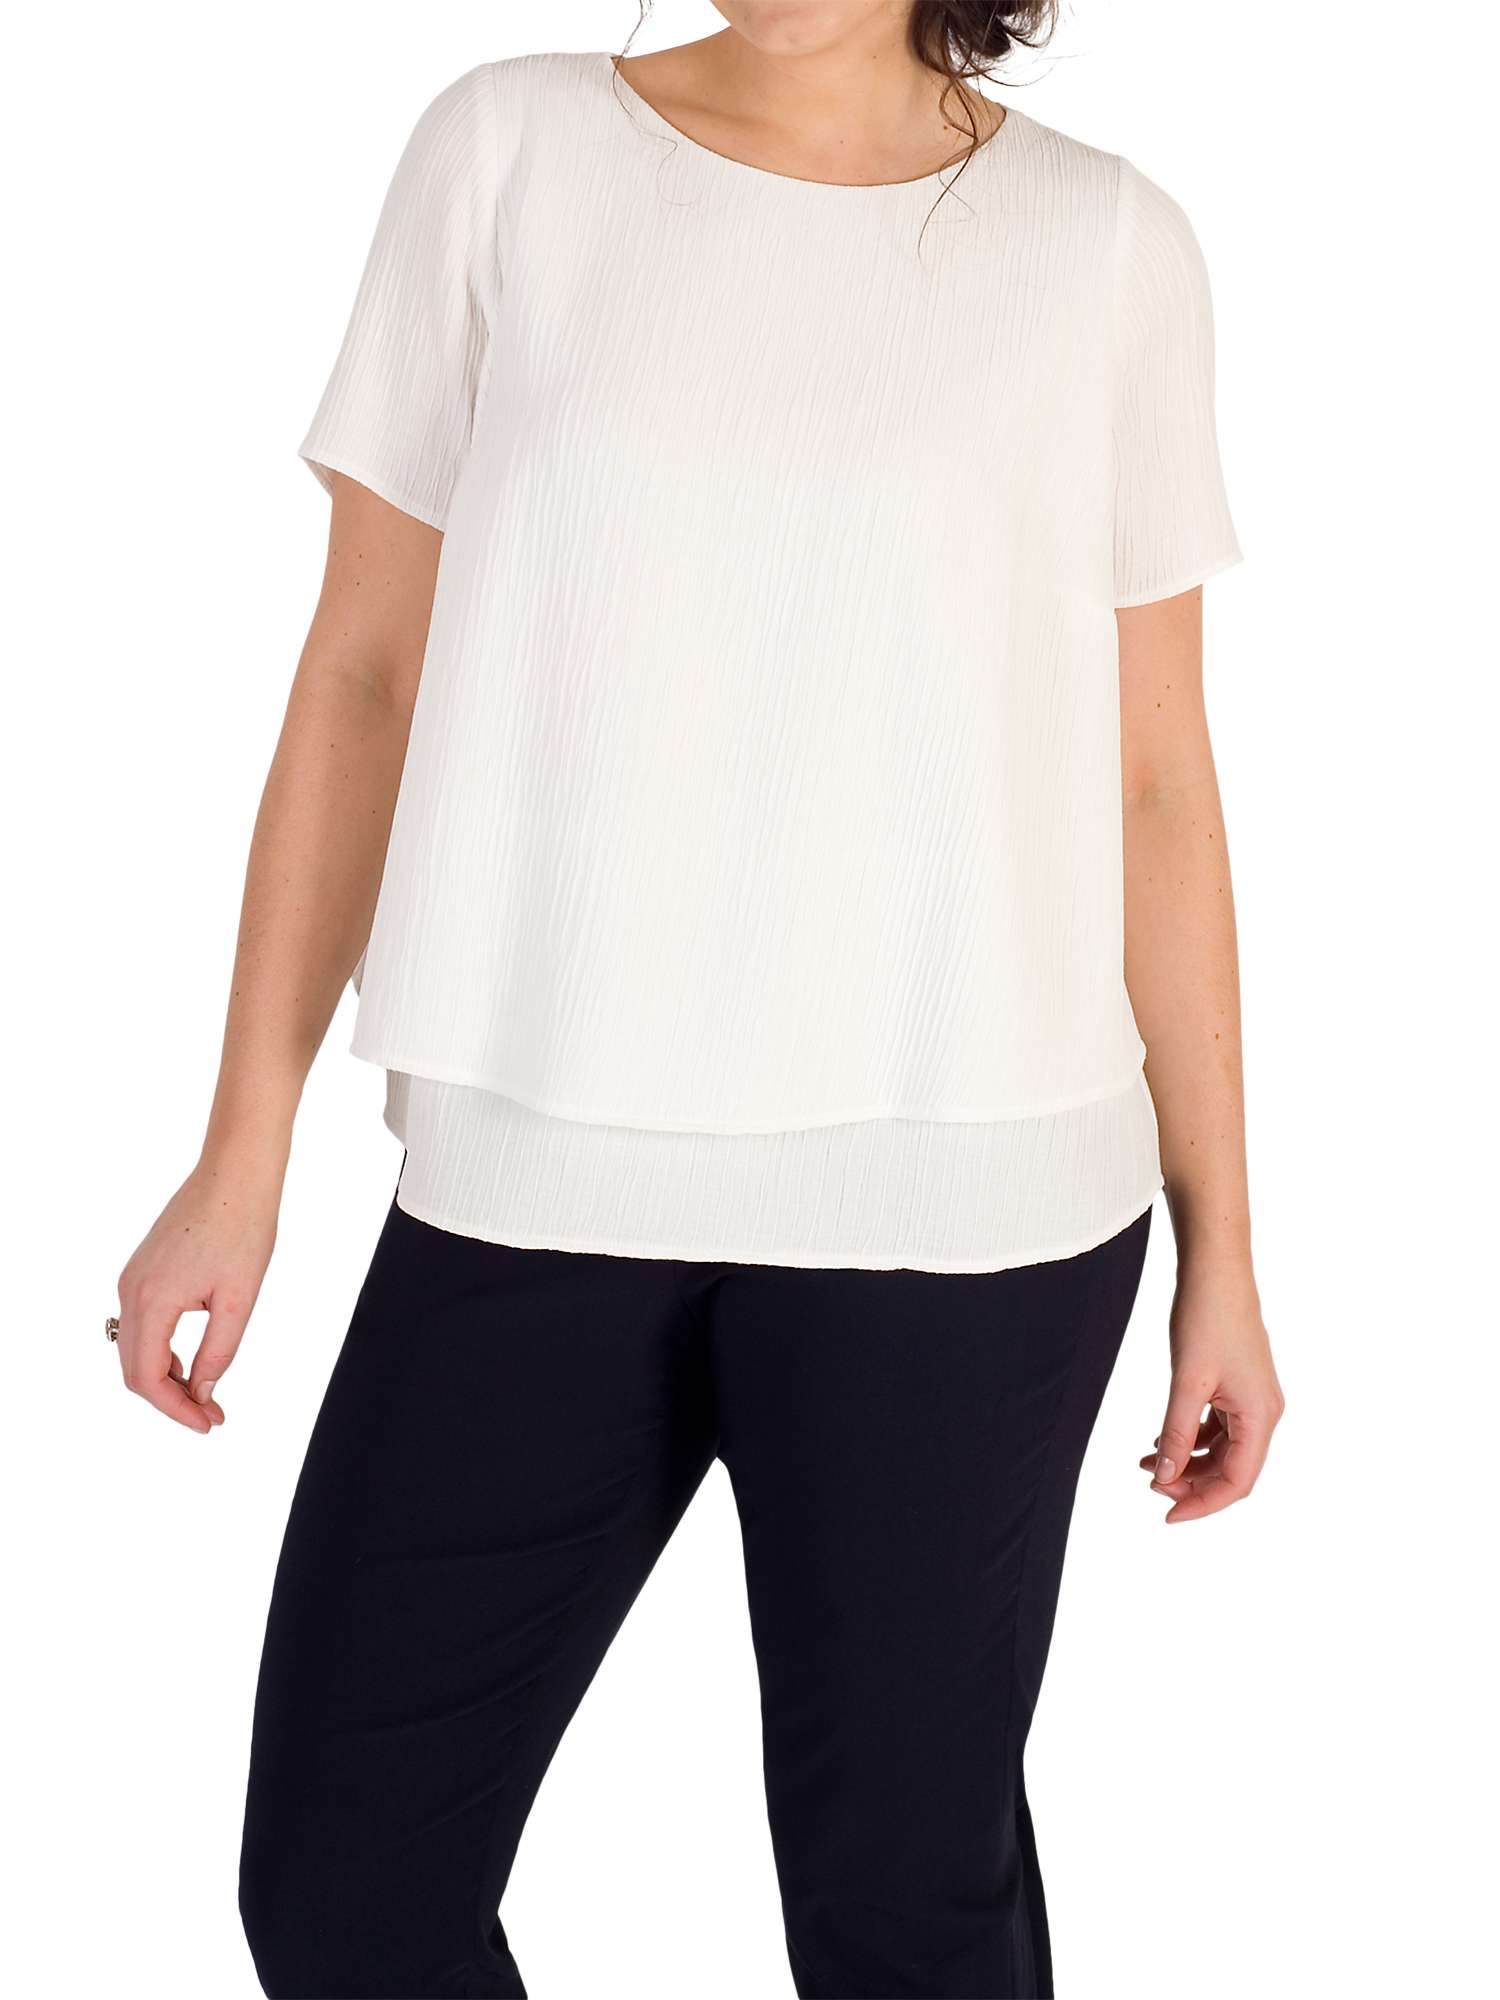 Buy Chesca Layered Jacquard Top, Ivory Online at johnlewis.com